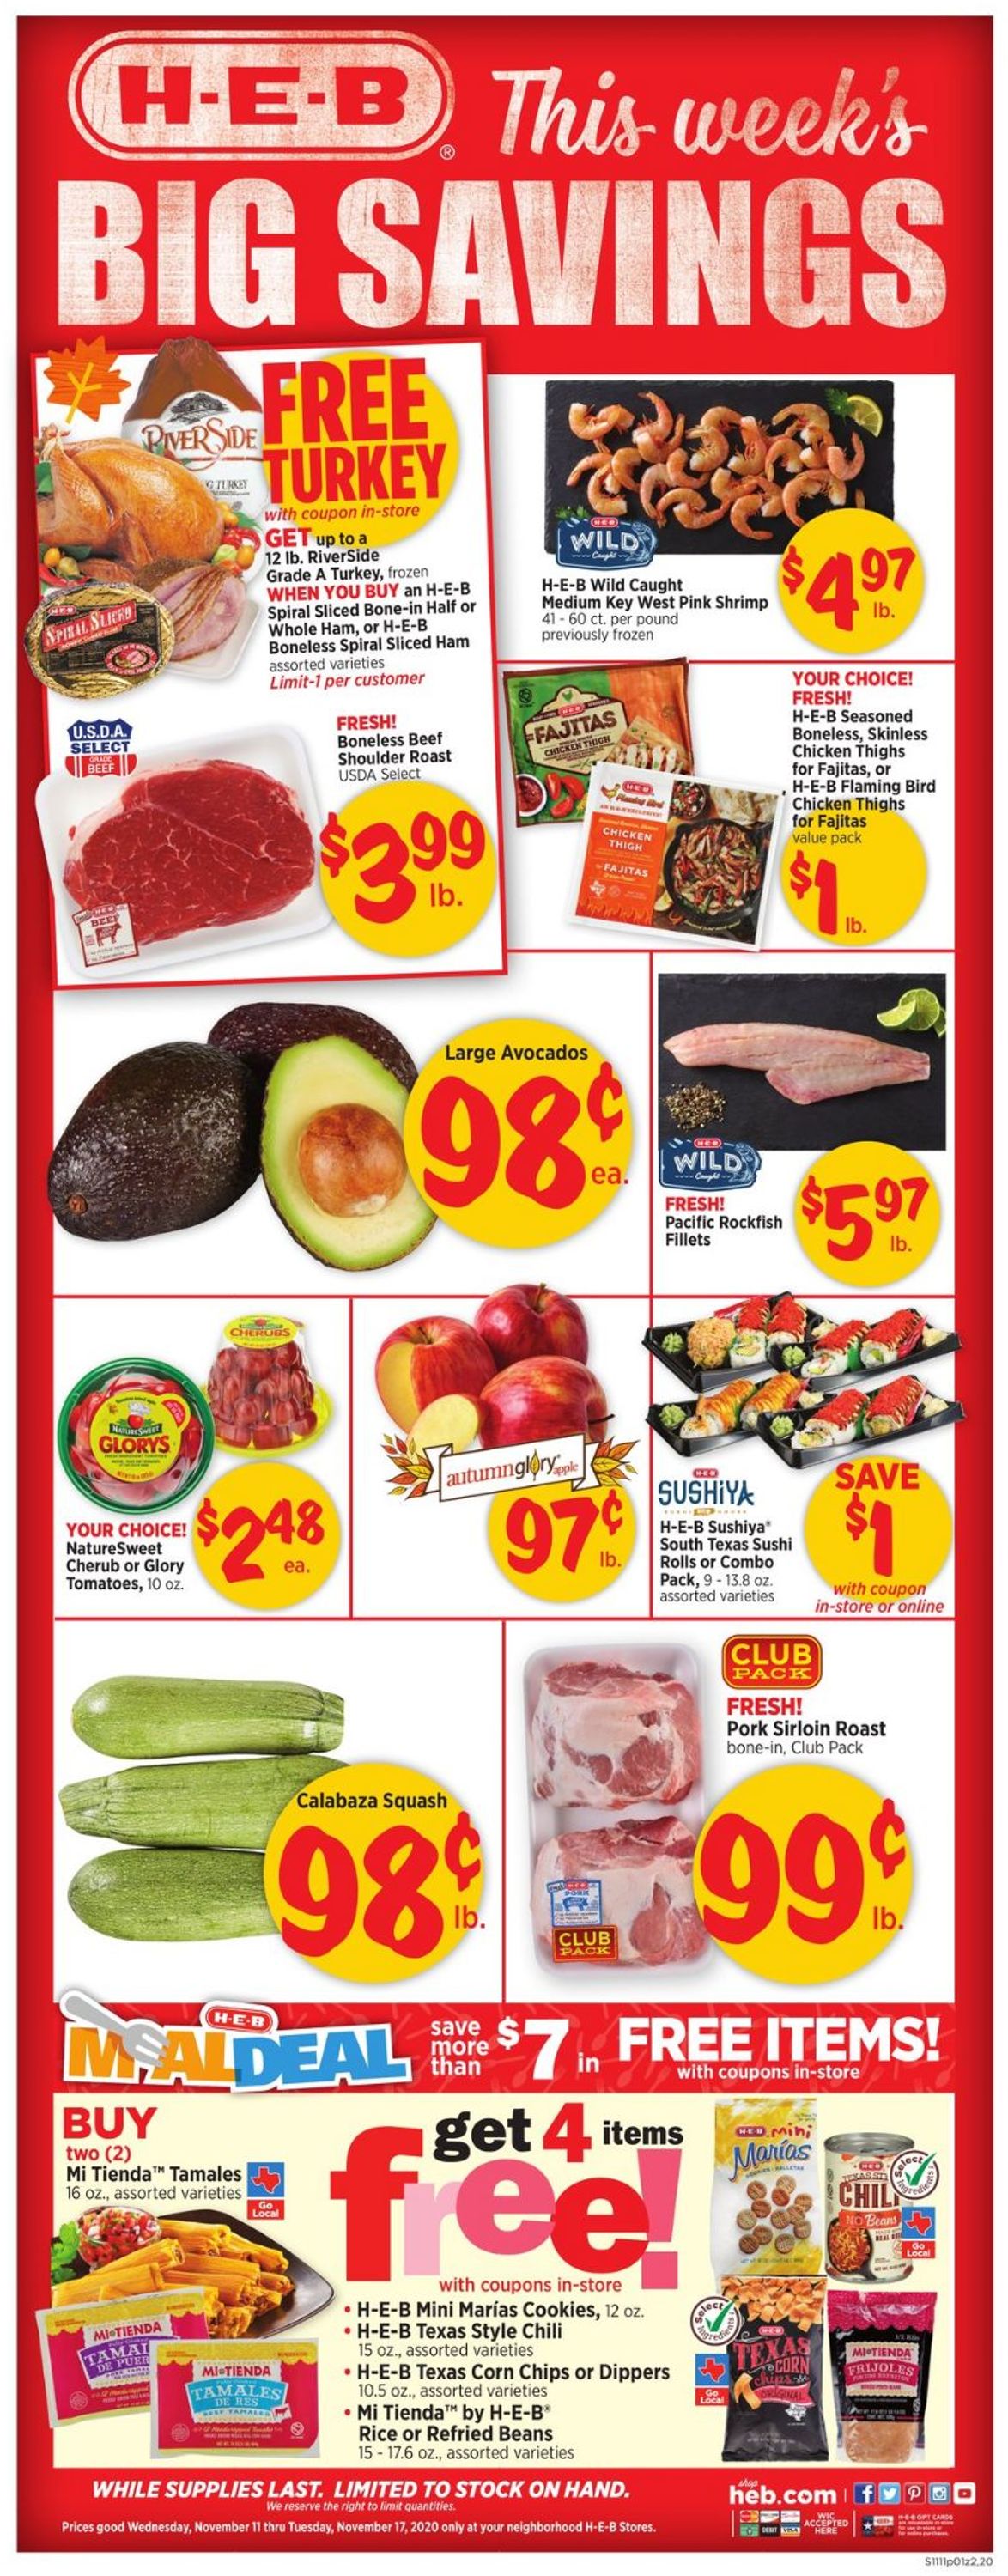 H-E-B Holiday 2020 Current weekly ad 11/11 - 11/17/2020 - frequent-ads.com